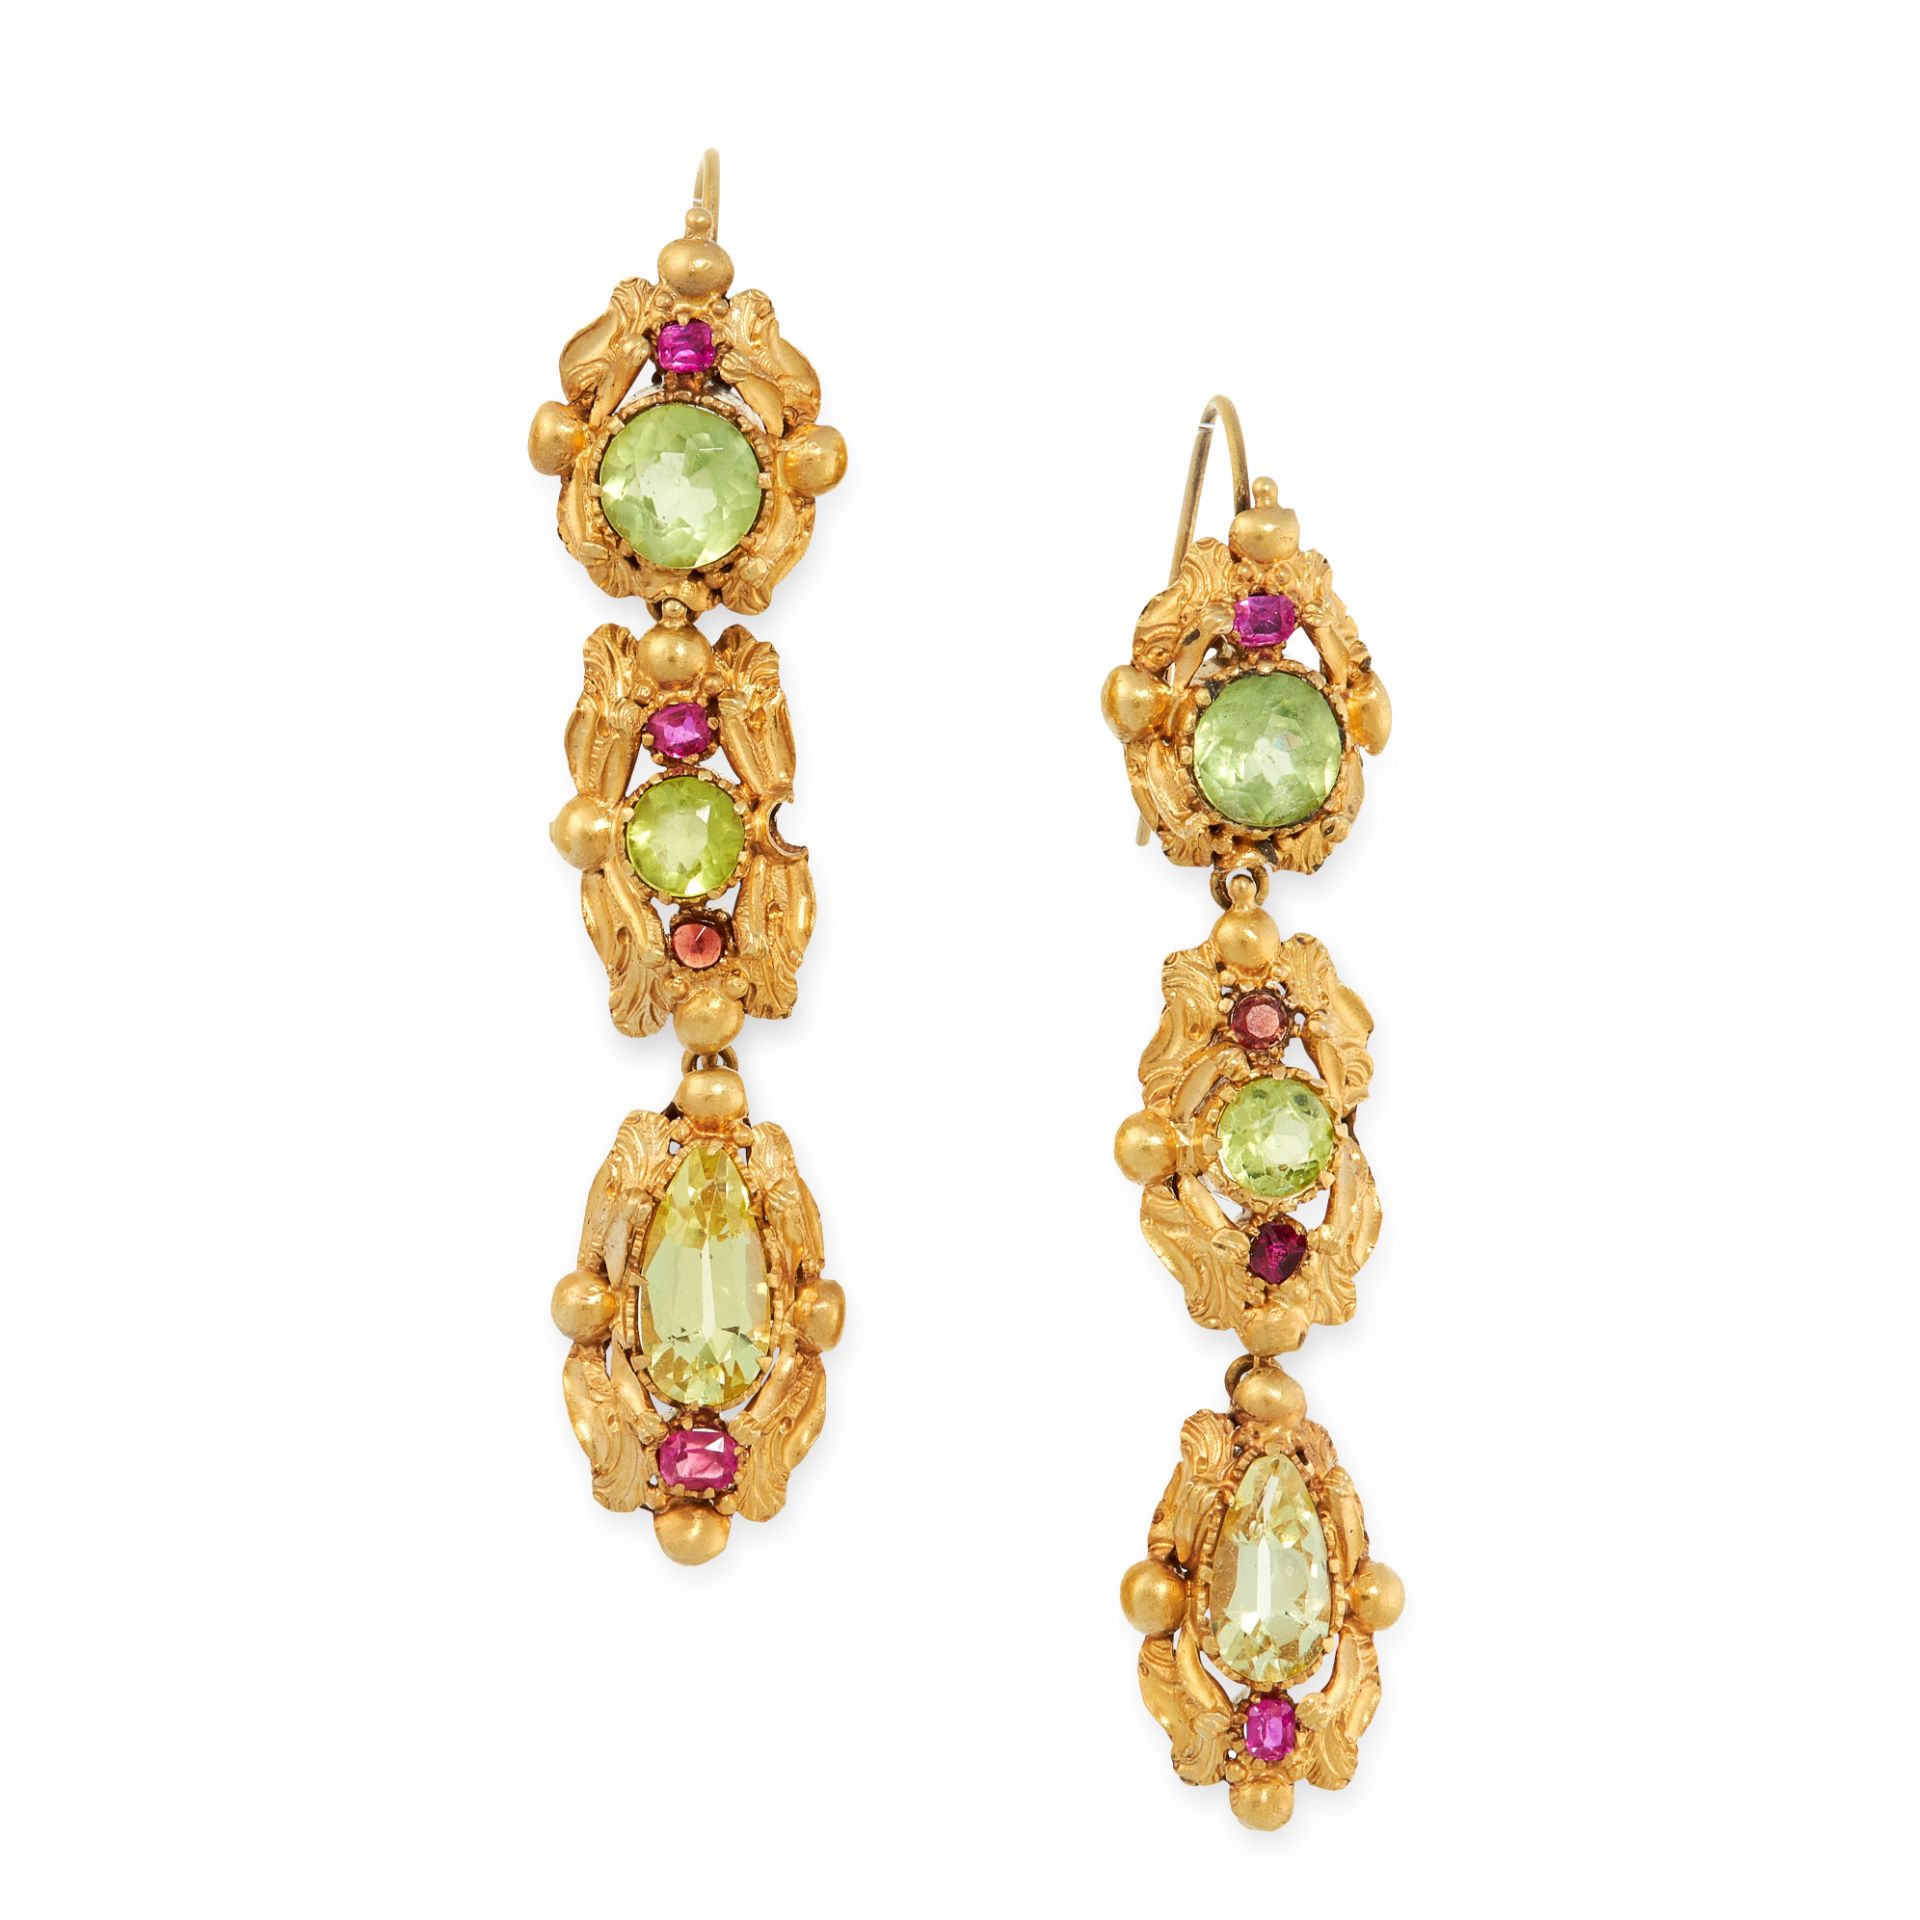 A PAIR OF ANTIQUE CHRYSOLITE AND RUBY EARRINGS, 19TH CENTURY in high carat yellow gold, each